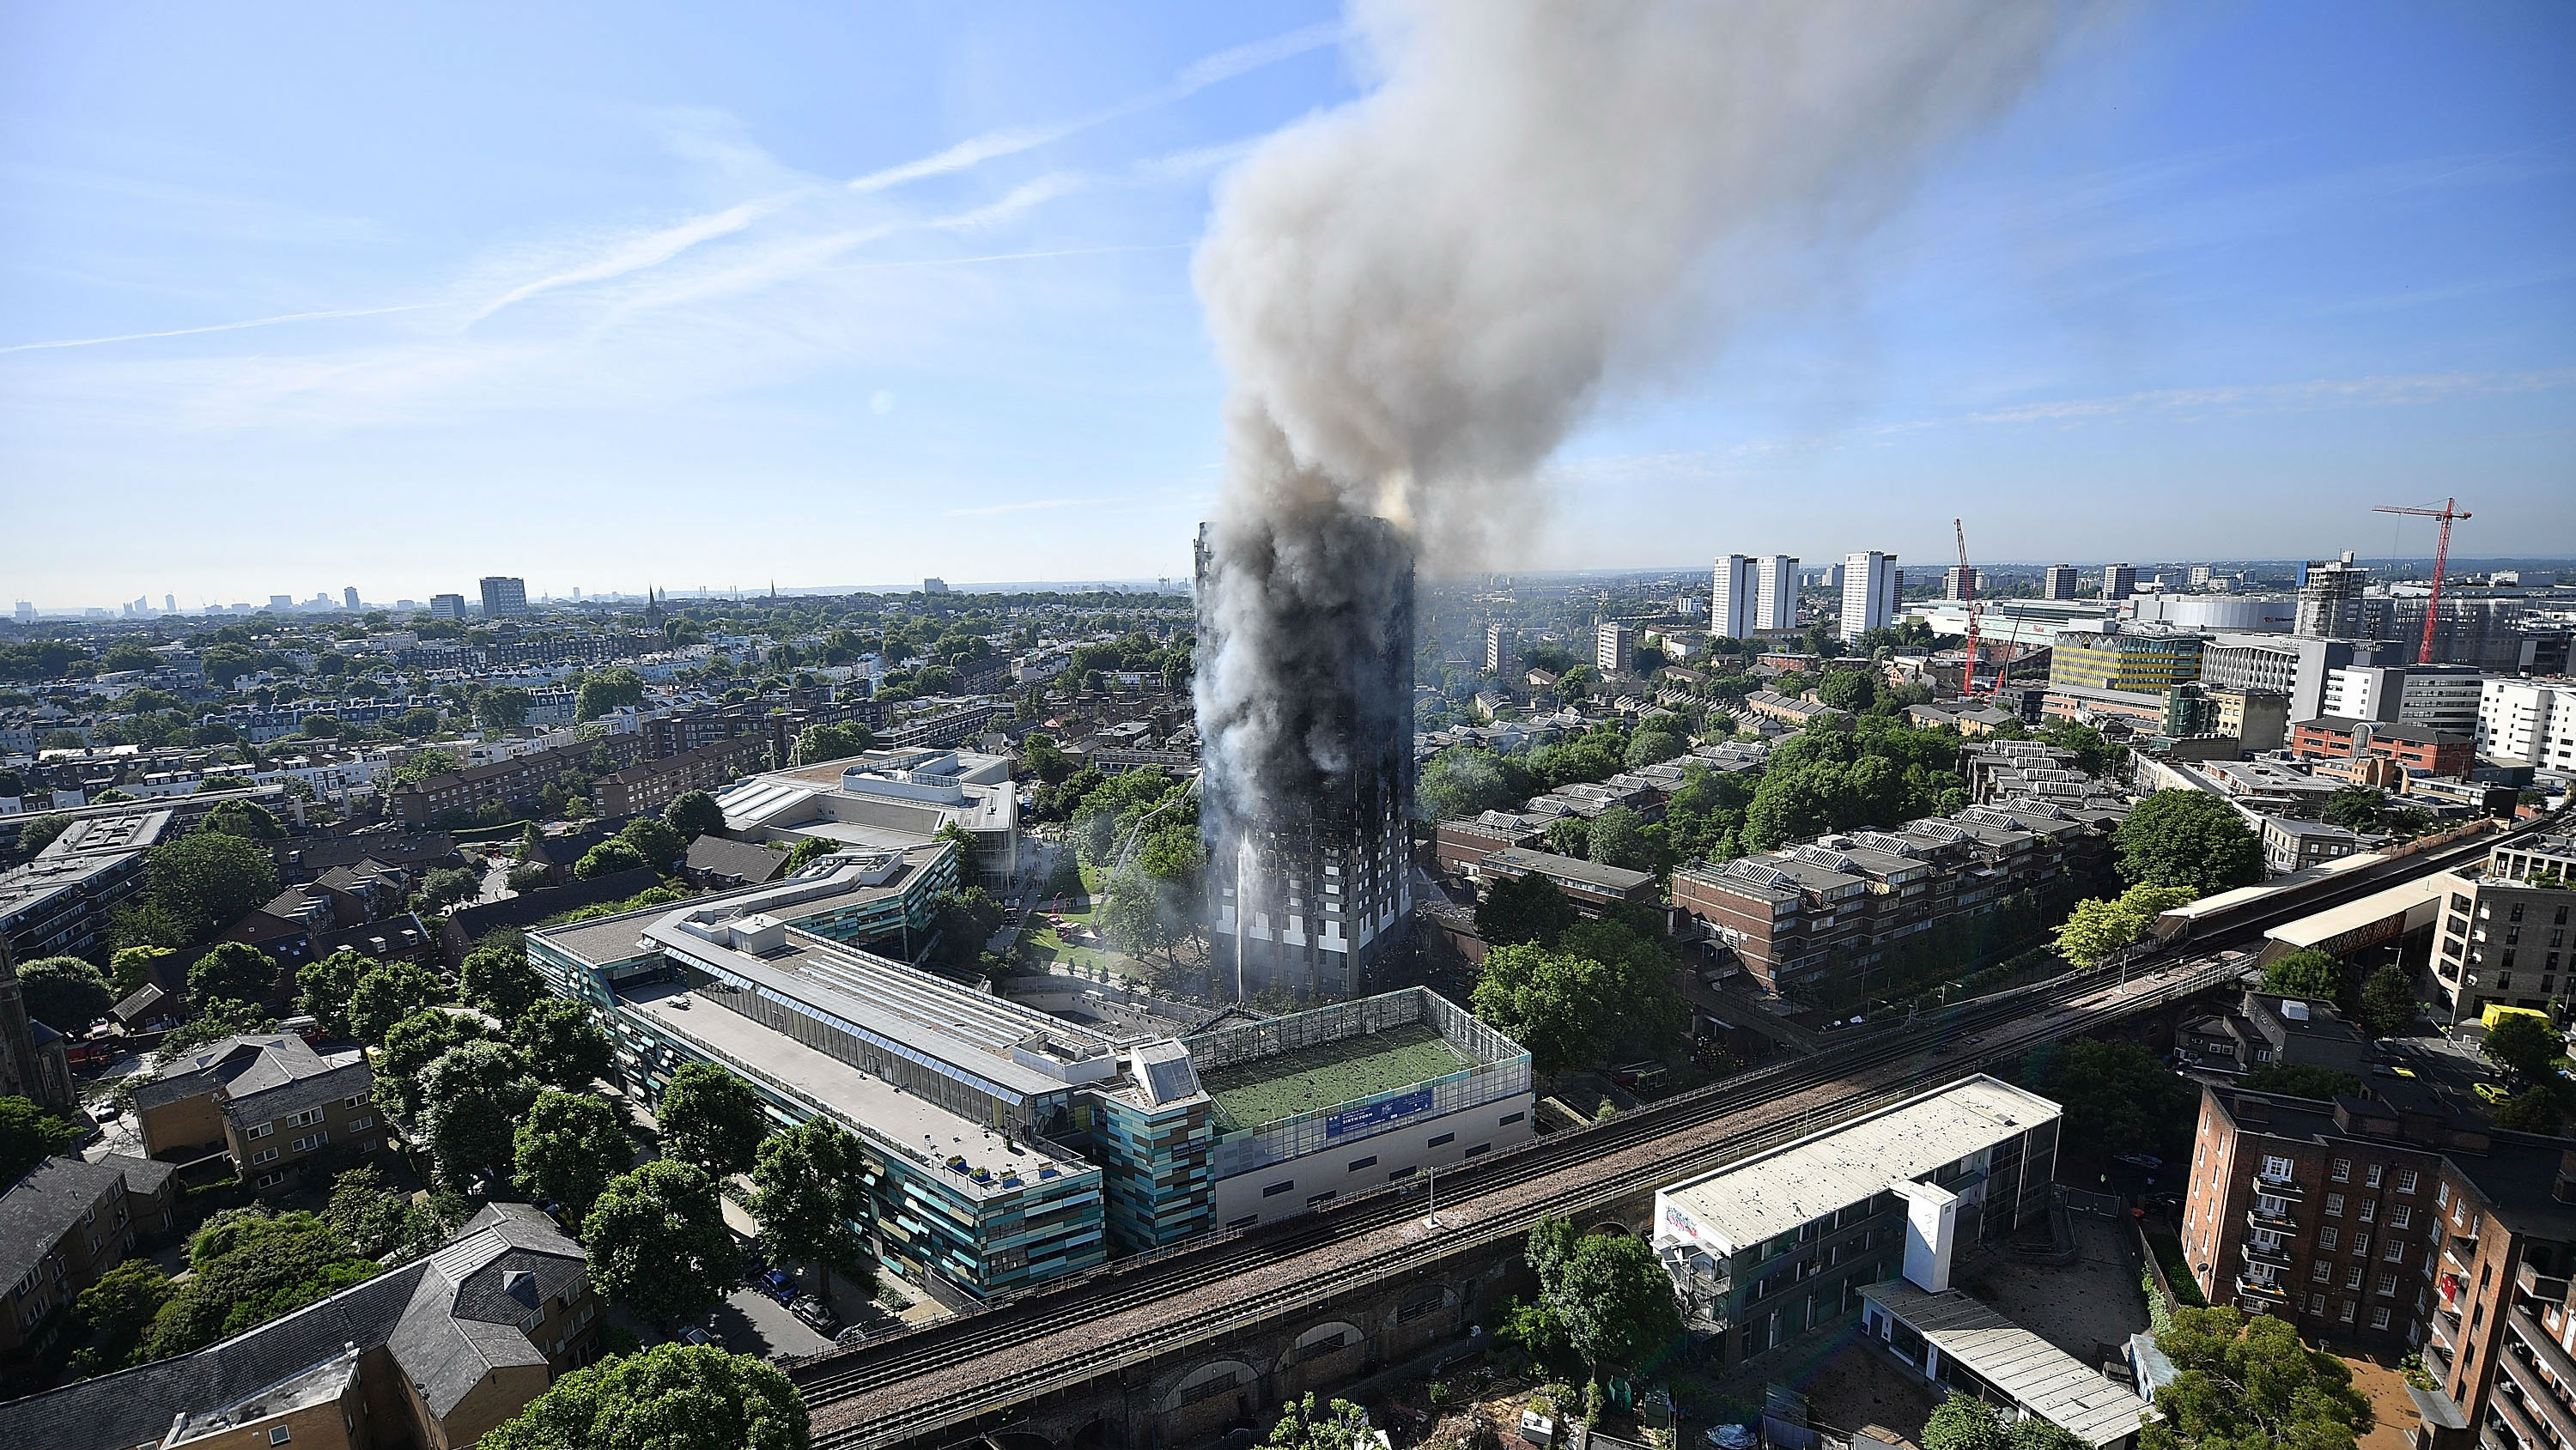 Grenfell Tower on fire 